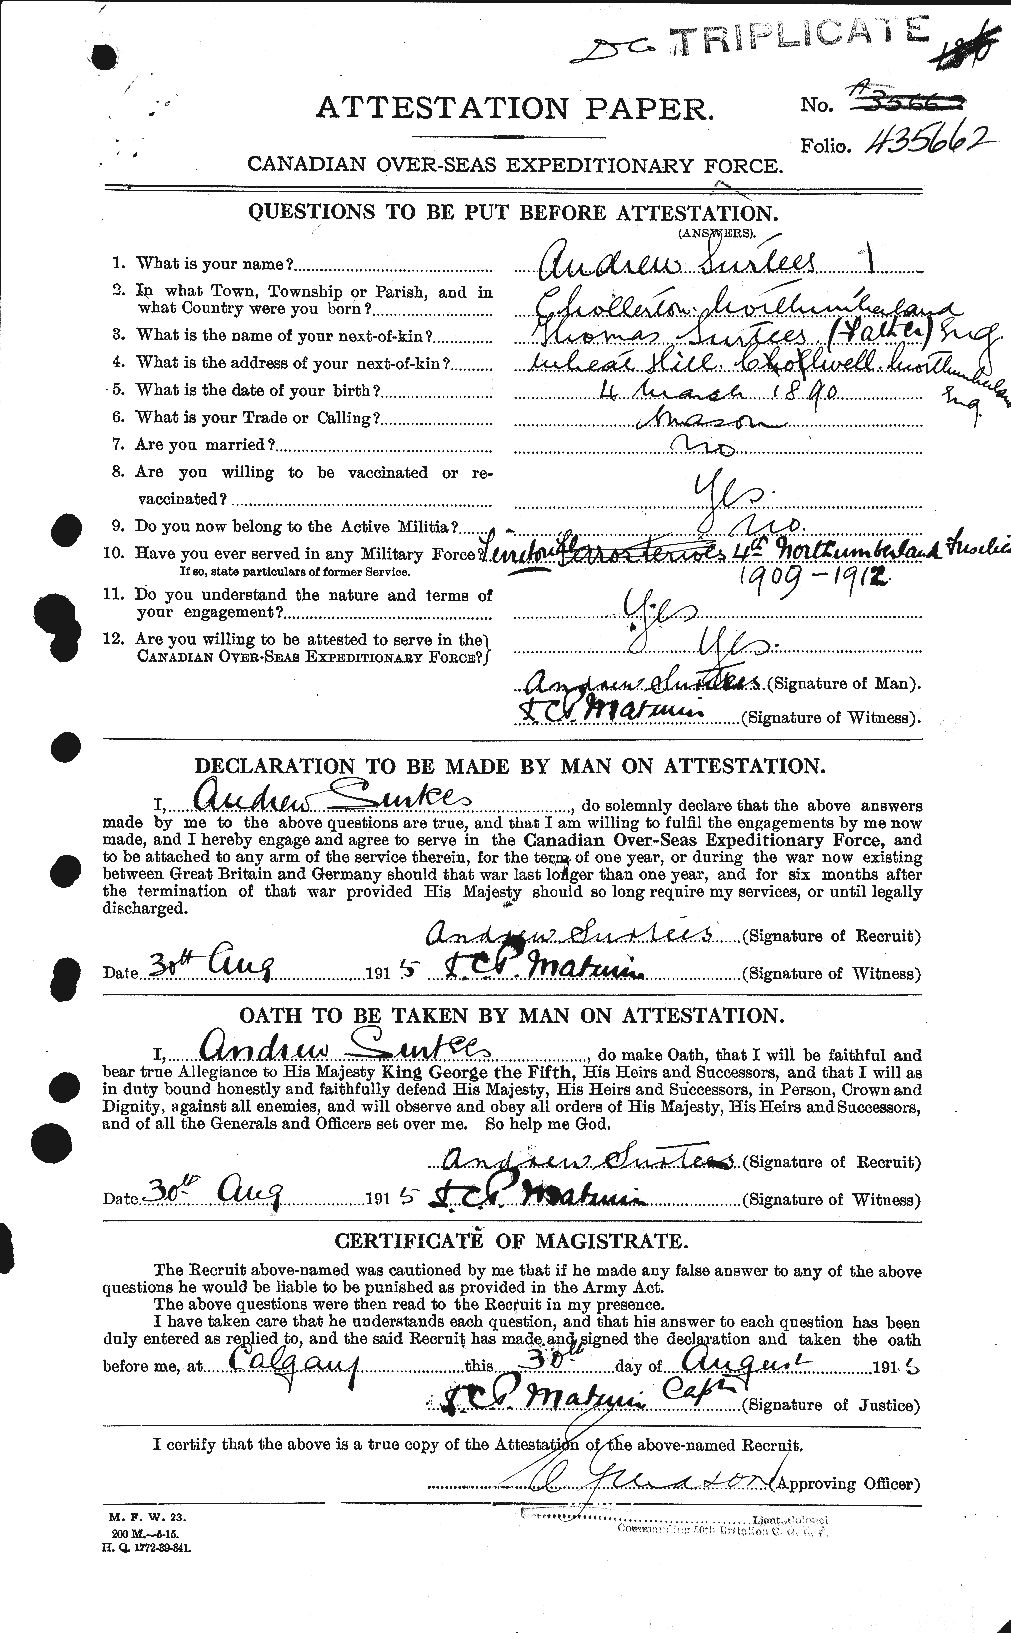 Personnel Records of the First World War - CEF 125597a